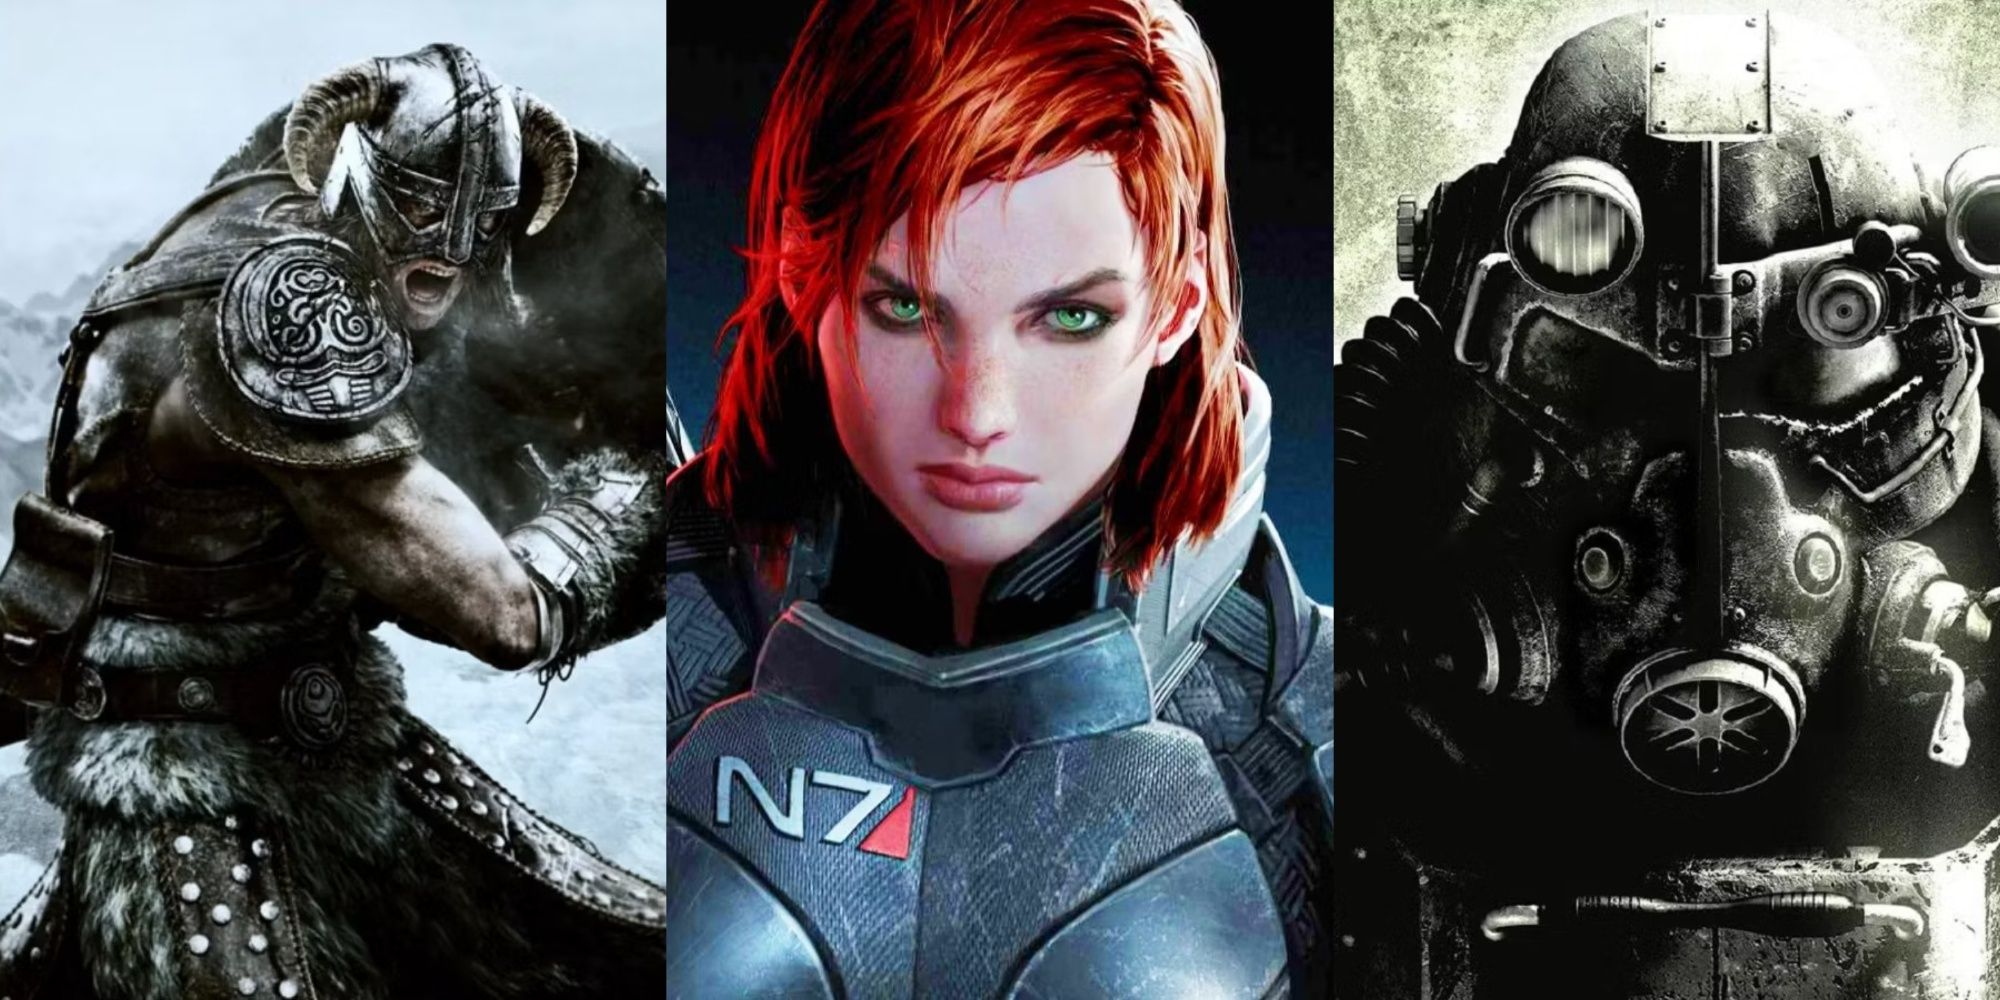 Mass Effect 3, Skyrim and Fallout 3 protagonists combined